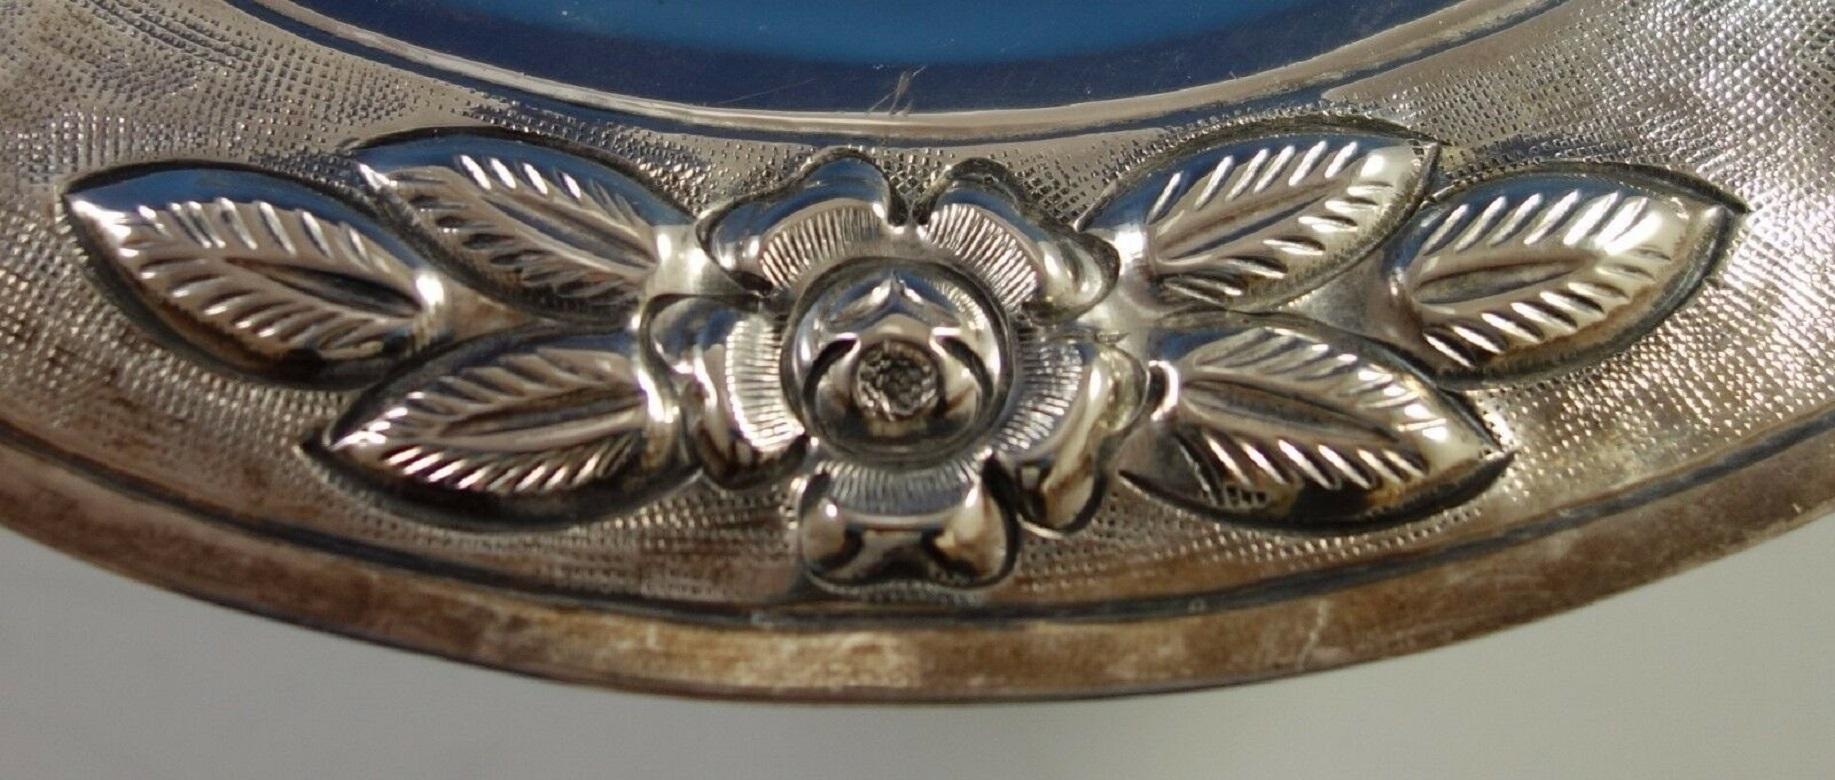 Aztec rose by Maciel
Aztec rose by Maciel large Mexican sterling silver serving tray, triangular, marked #9170. This piece weighs 34.9 troy ounces and measures 1/4